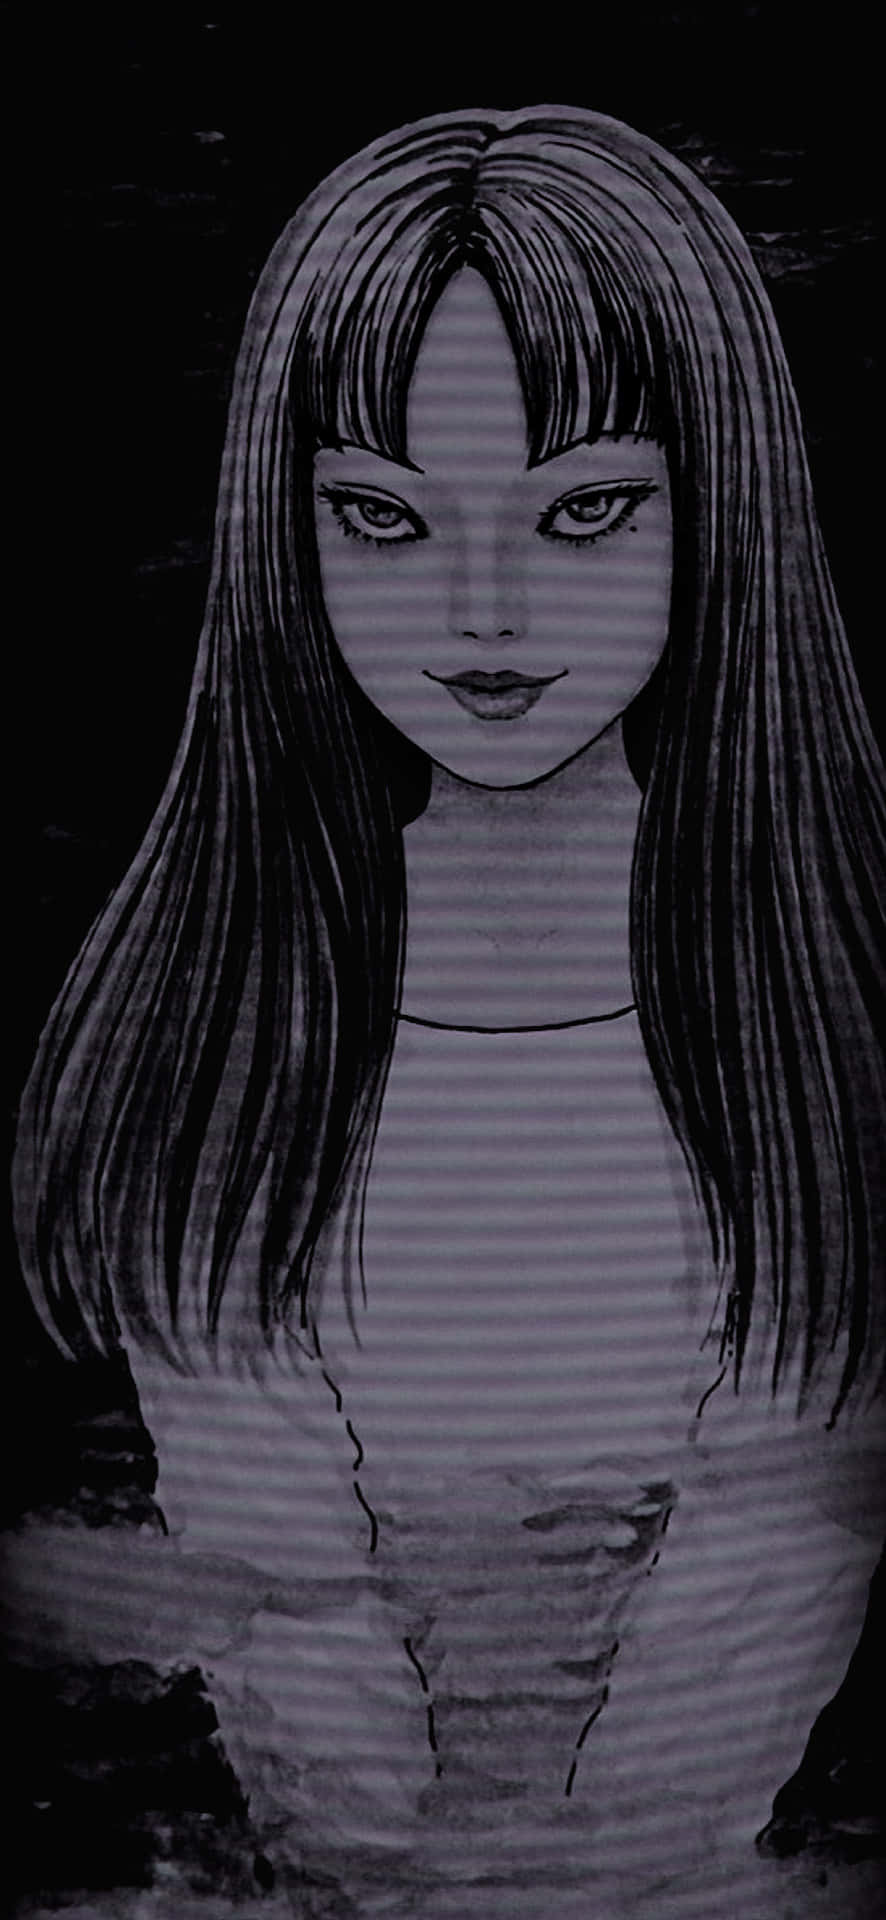 A Girl With Long Hair Is Shown In The Dark Wallpaper